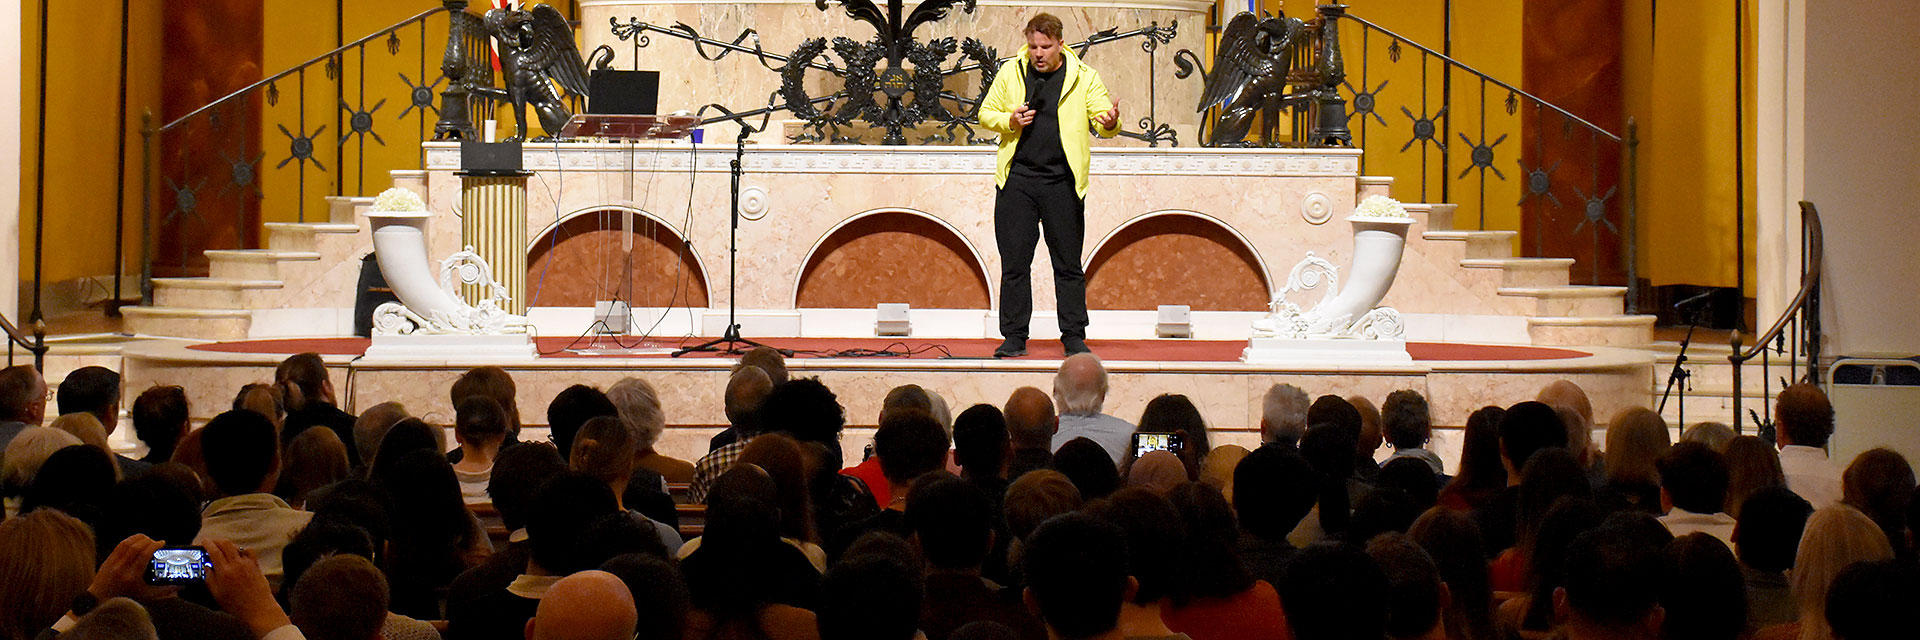 Bjarke Ingels presents to a packed audience at The Temple in Atlanta, Georgia.